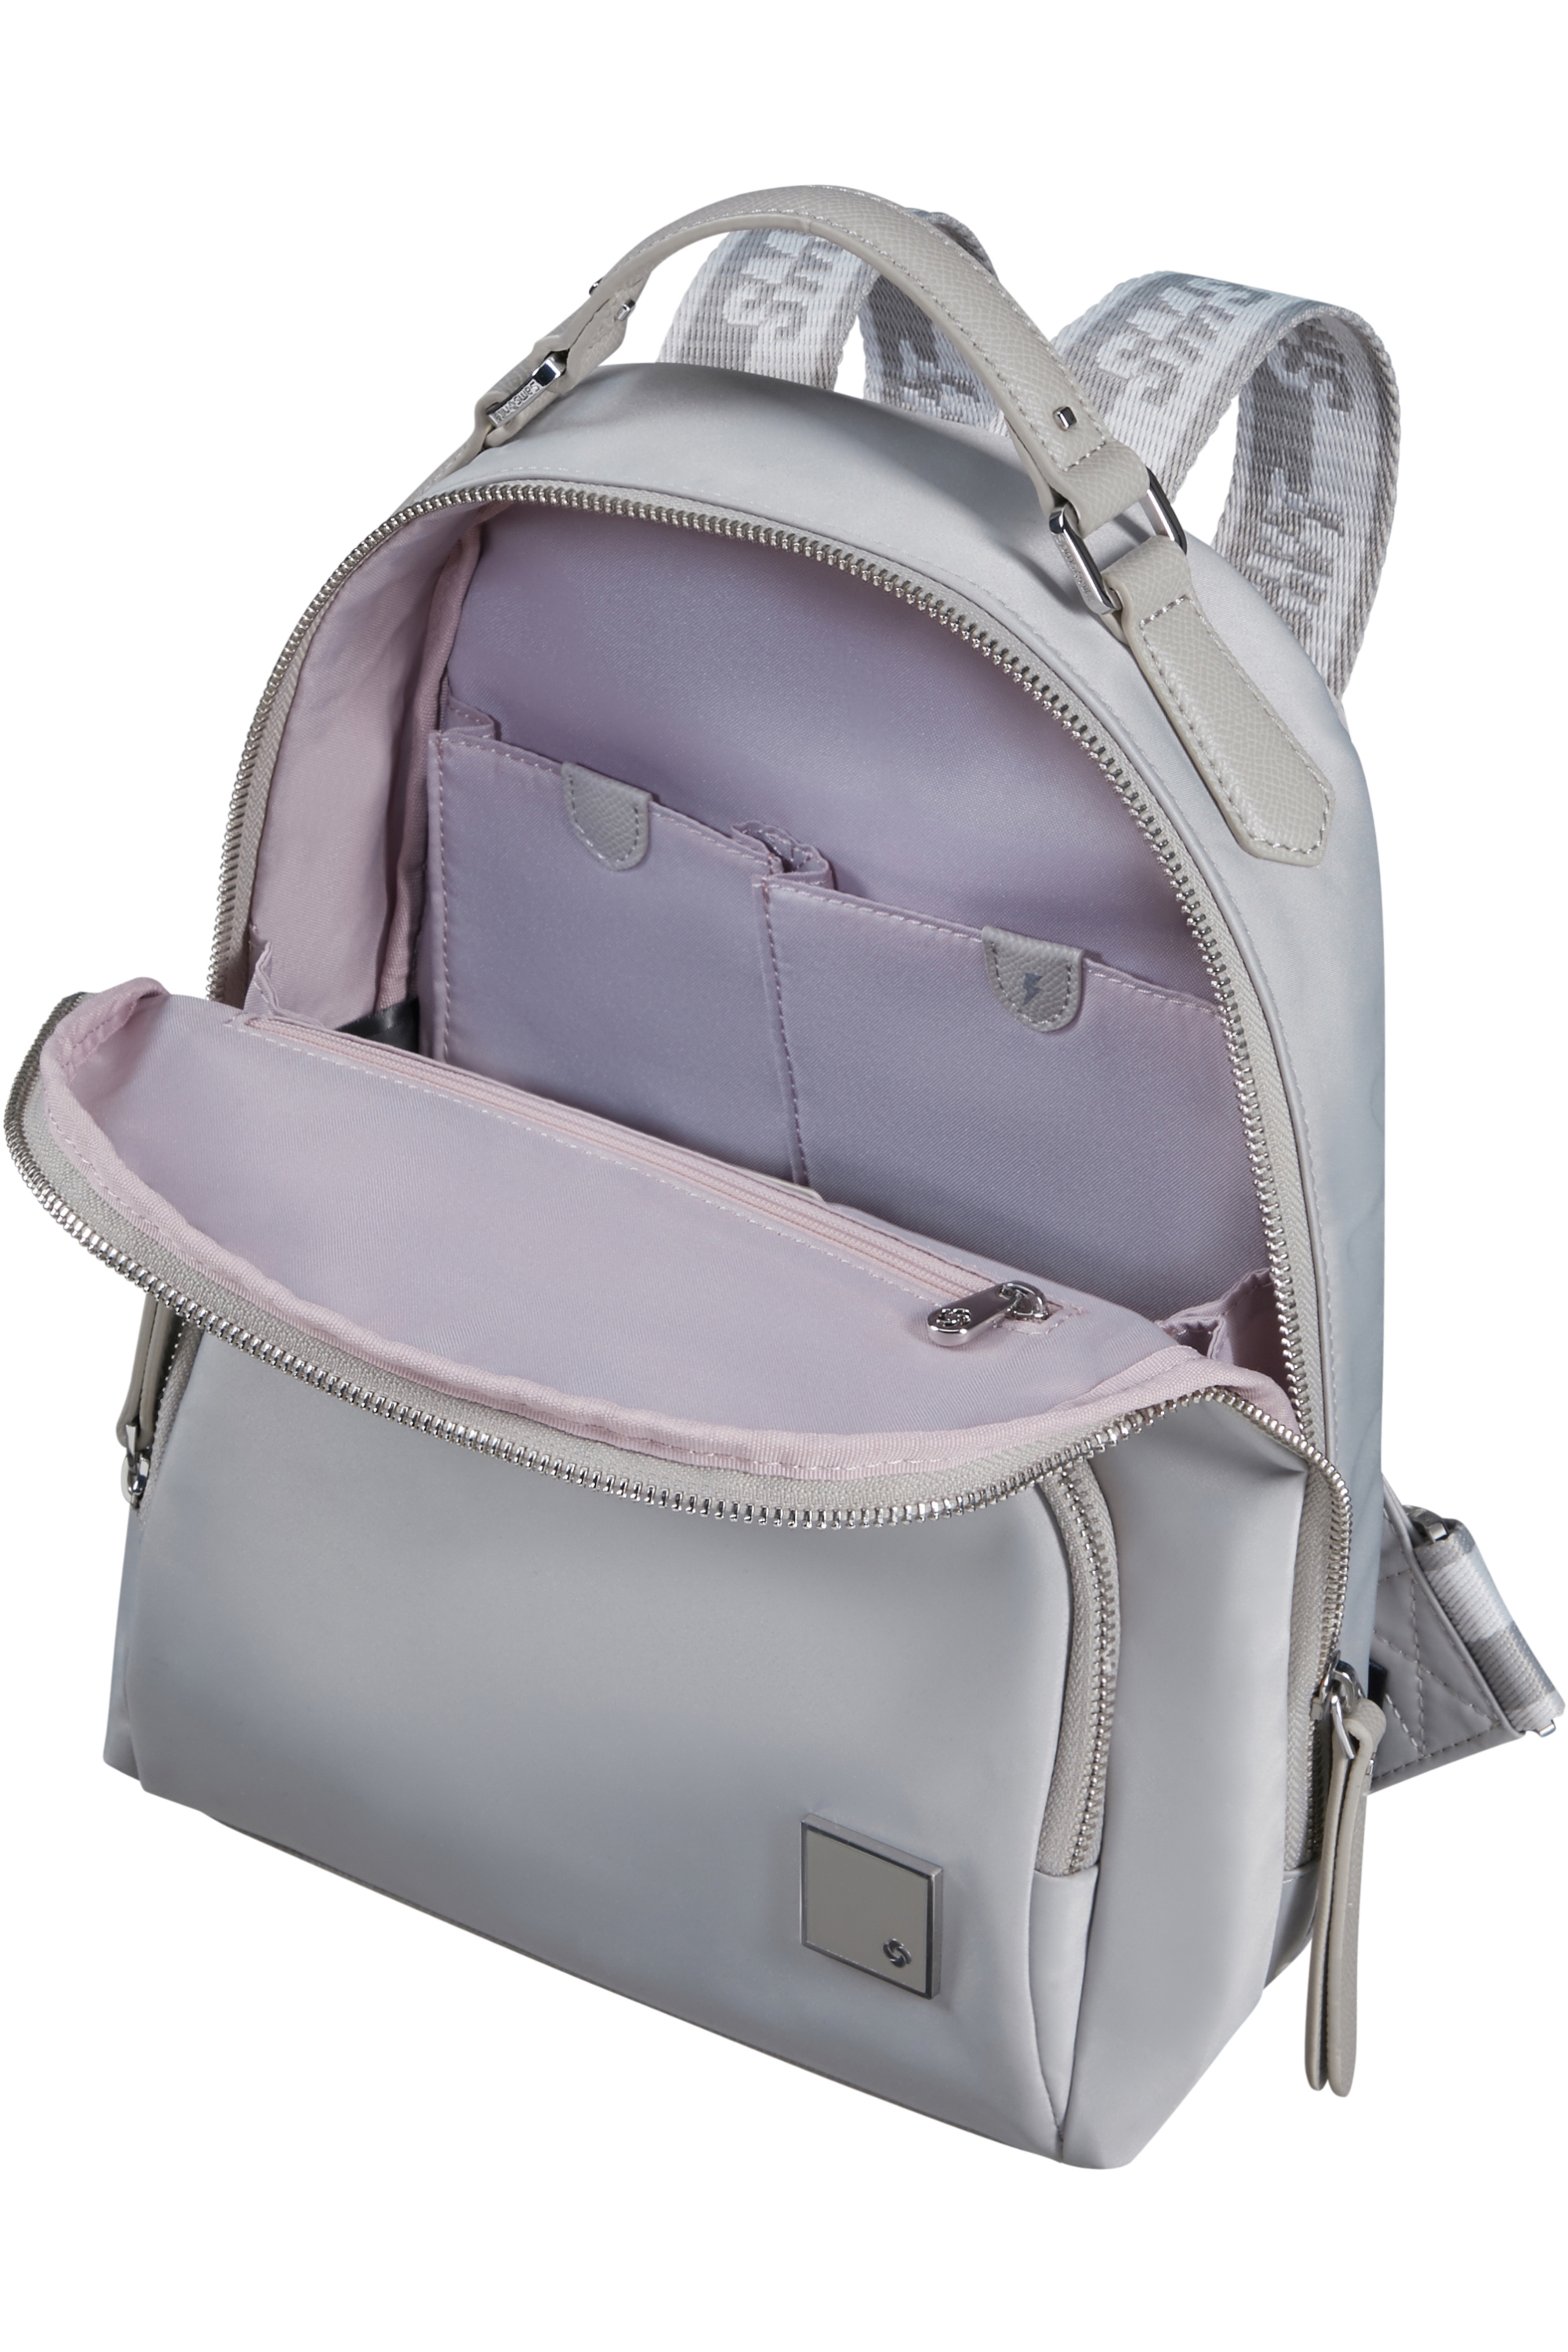 142821-1301-142821_1301_essentially_karissa_backpack_s_smsnt_interior-424c9eb2-e74b-4818-aa71-ae3500ecf432-png